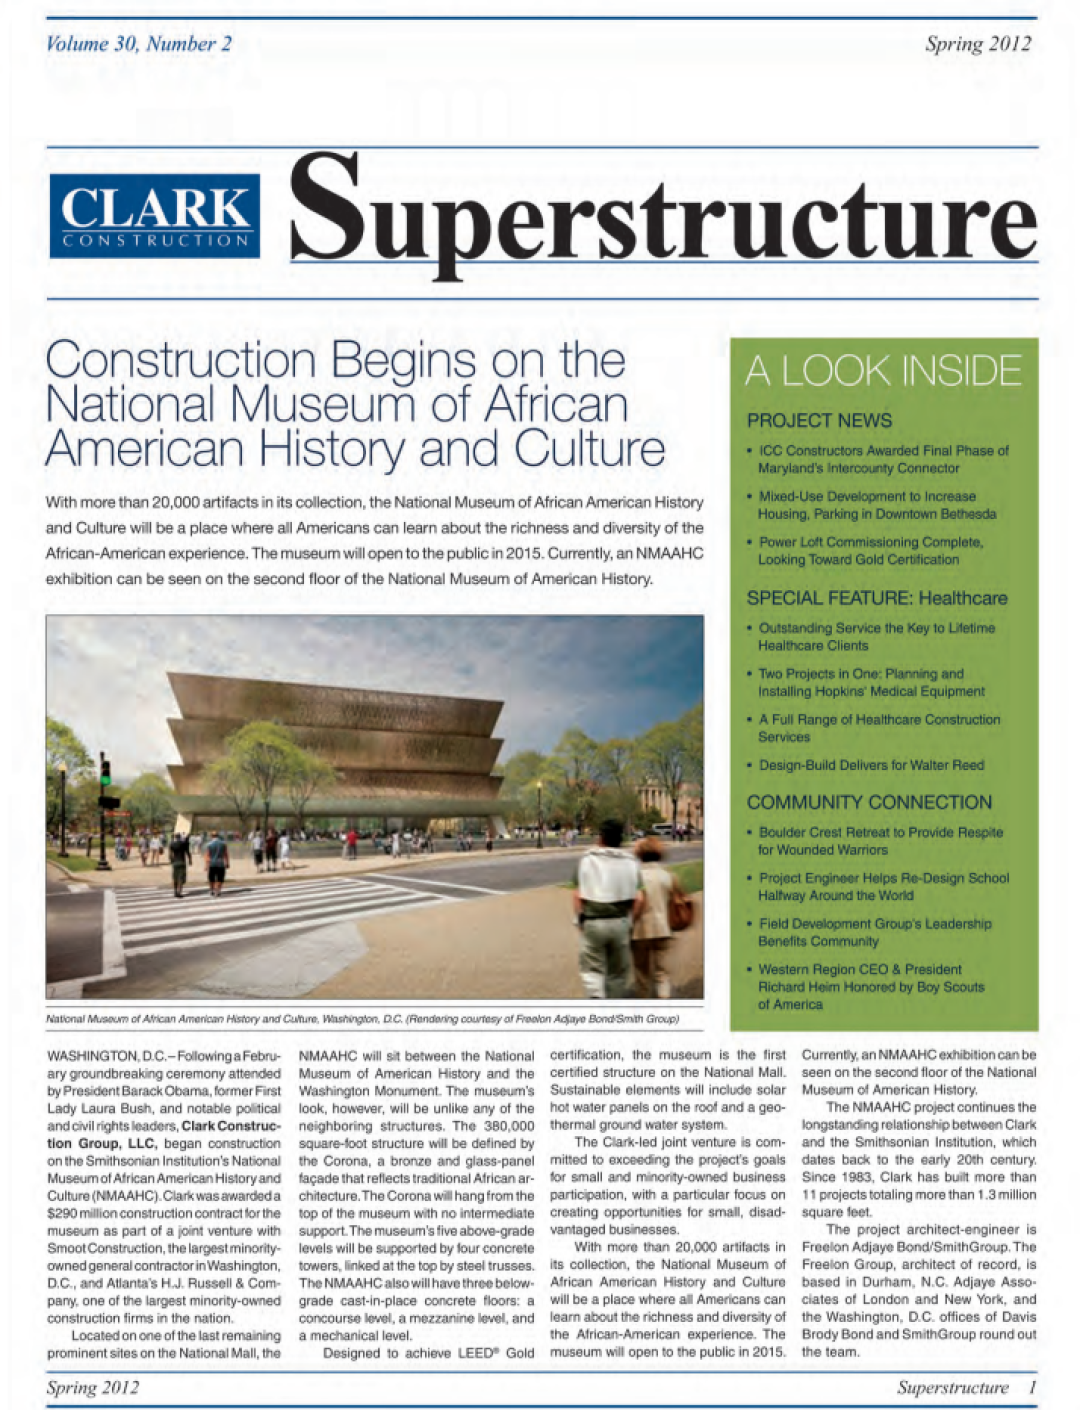 superstructure Spring 2012